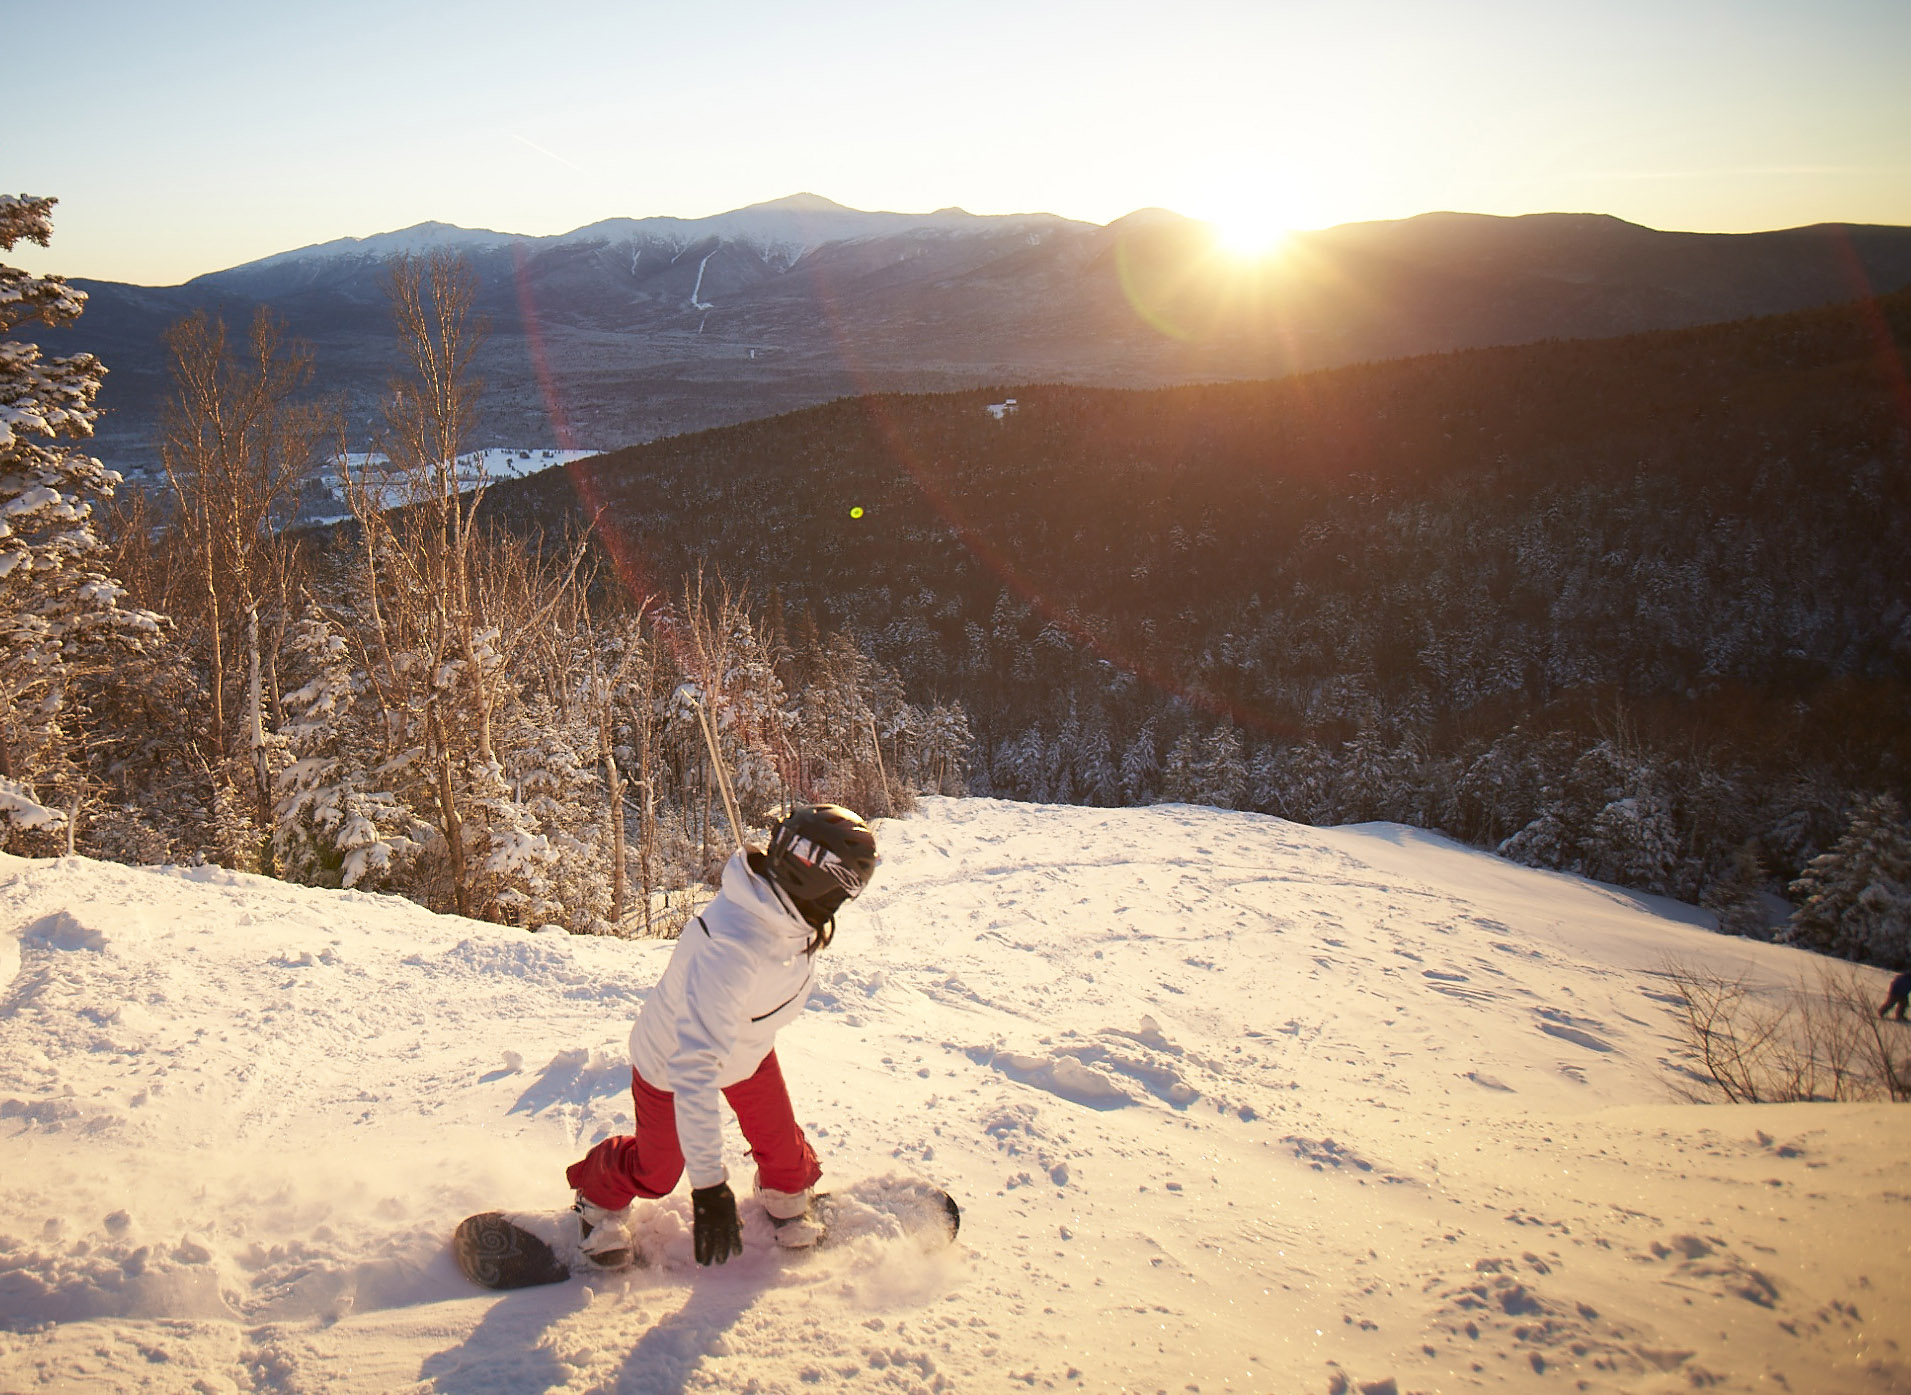 a snowboarder on a mountain at sunset